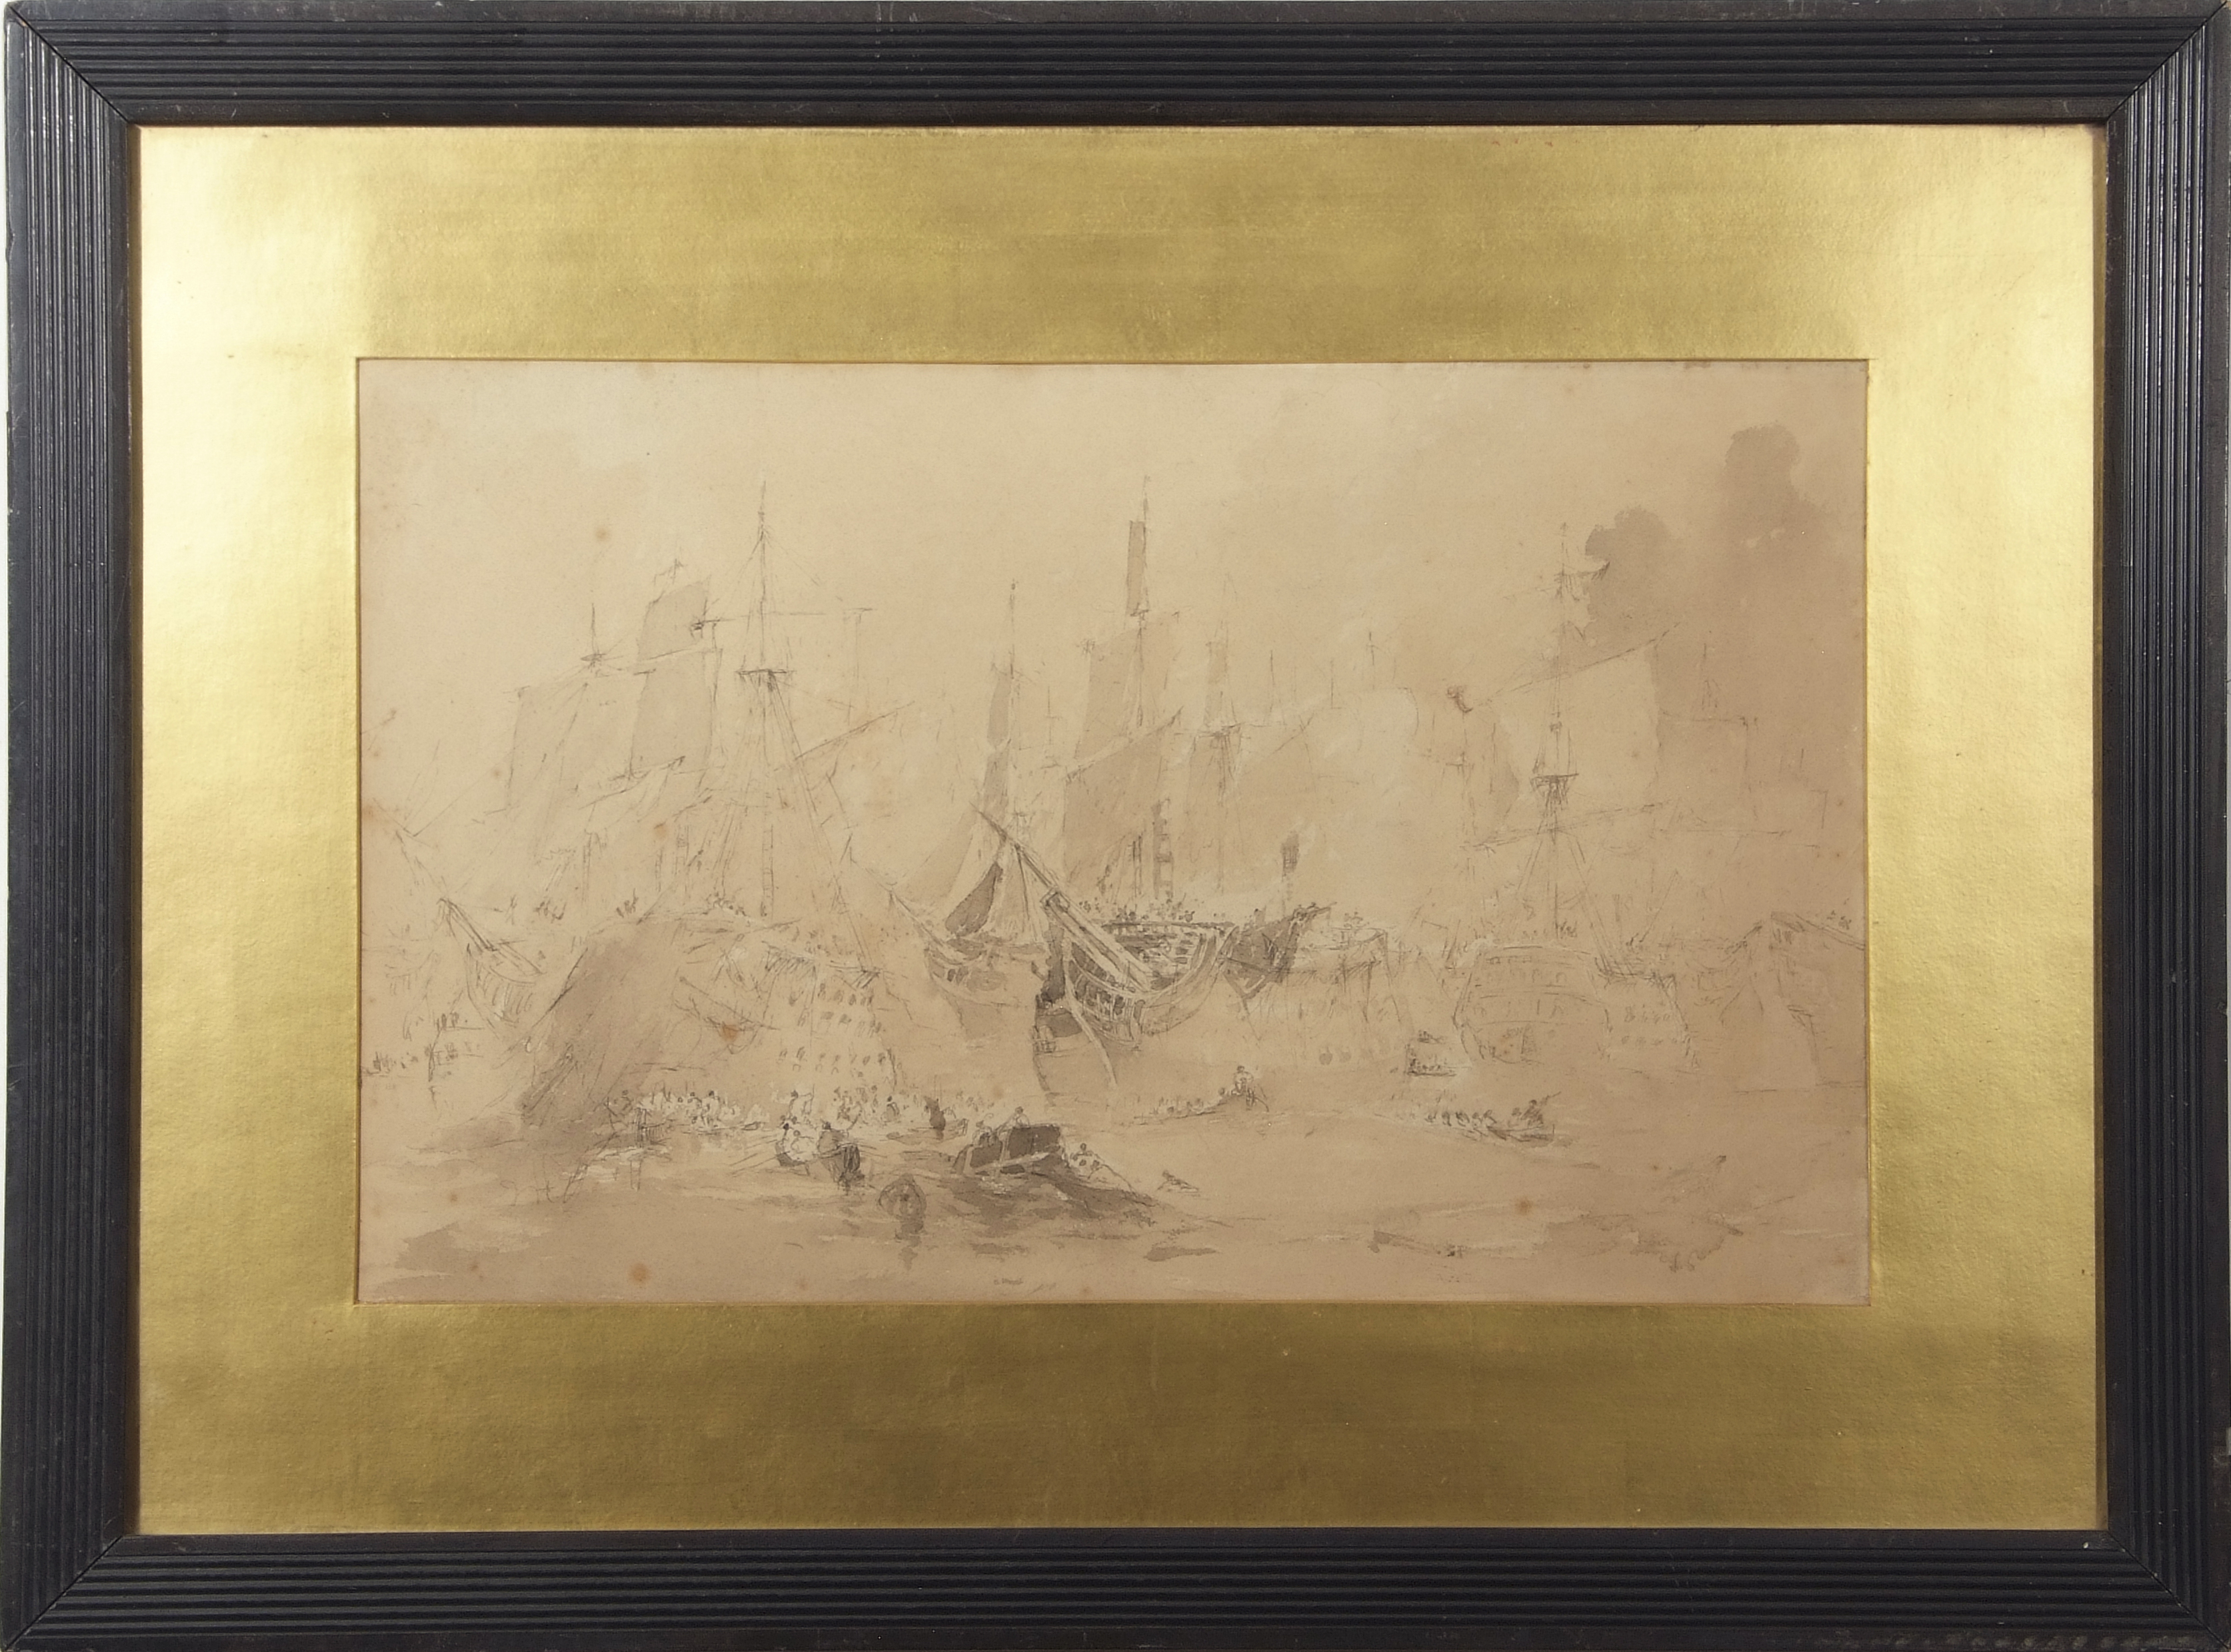 Attributed to Philippe Jacques de Loutherbourg (1740-1812), A sea battle (possibly a study for his